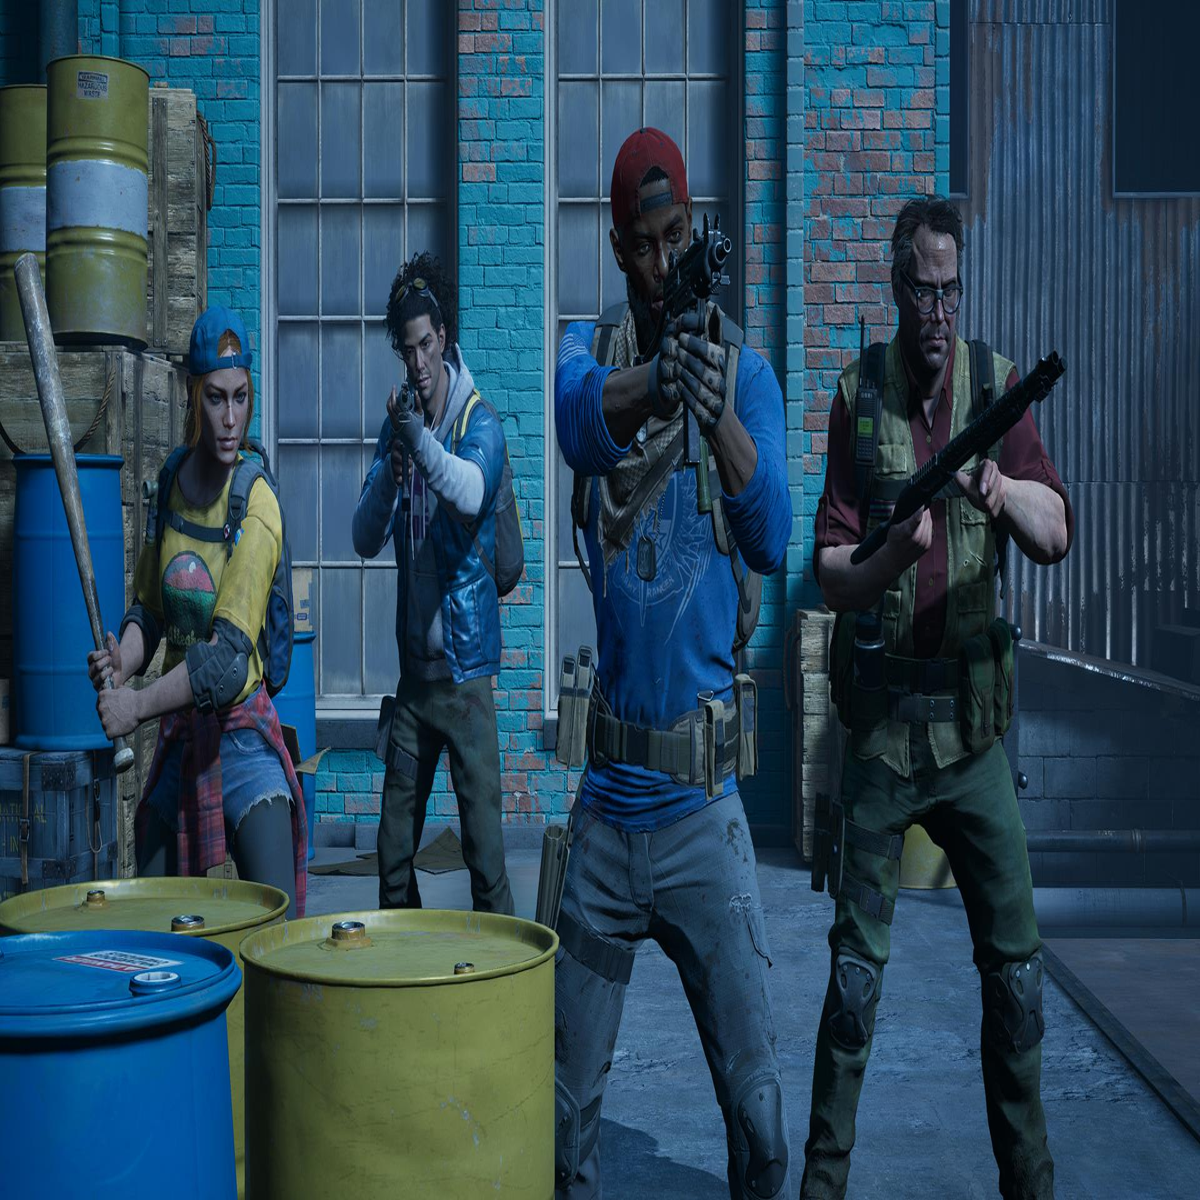 Back 4 Blood co-op zombie shooter gets new trailer - PC - News